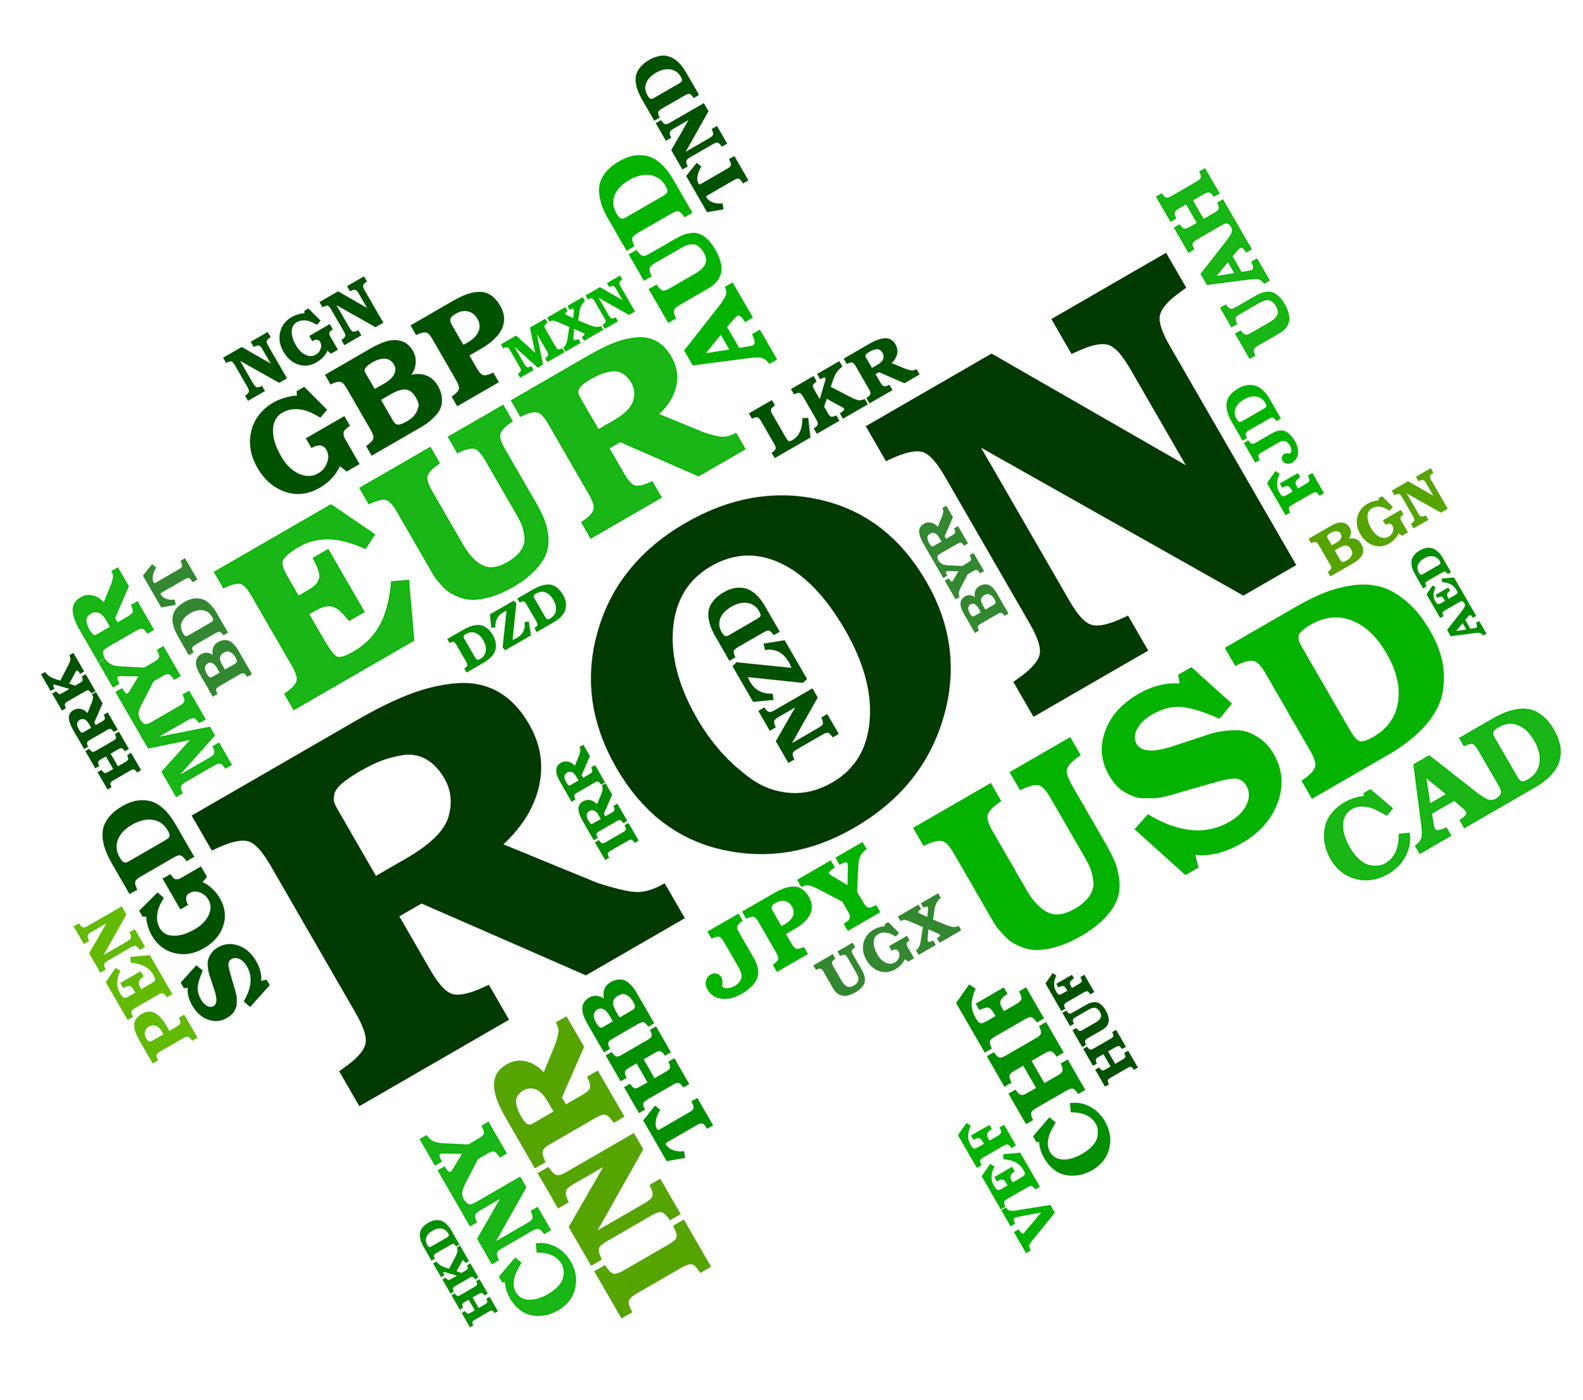 Ron currency shows forex trading and currencies photo